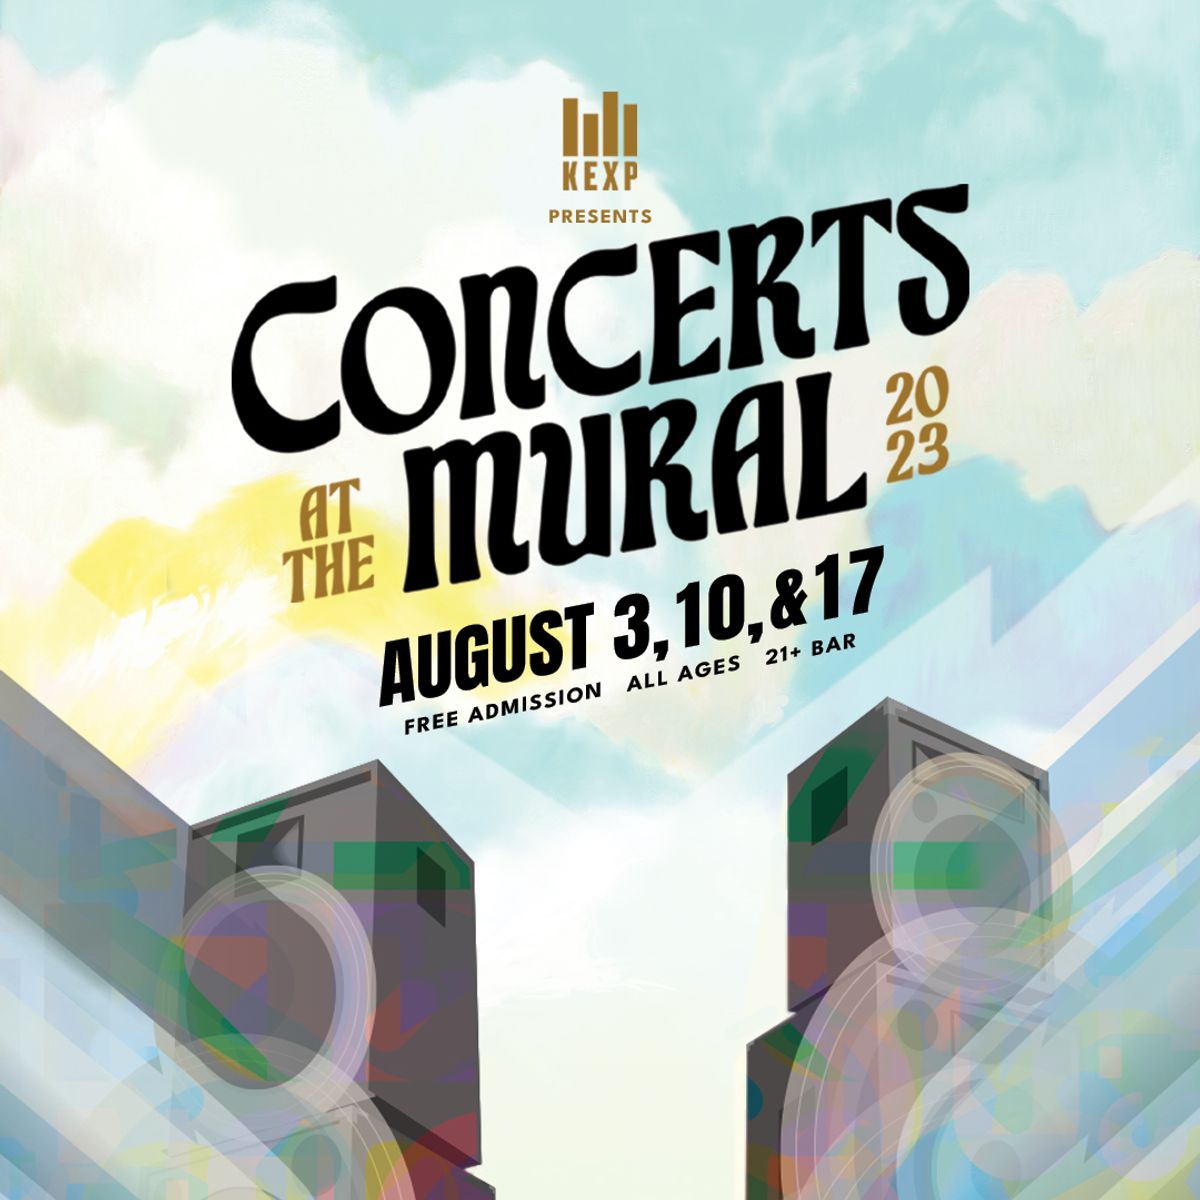 KEXP Presents Concerts at the Mural at Mural Amphitheatre in Seattle